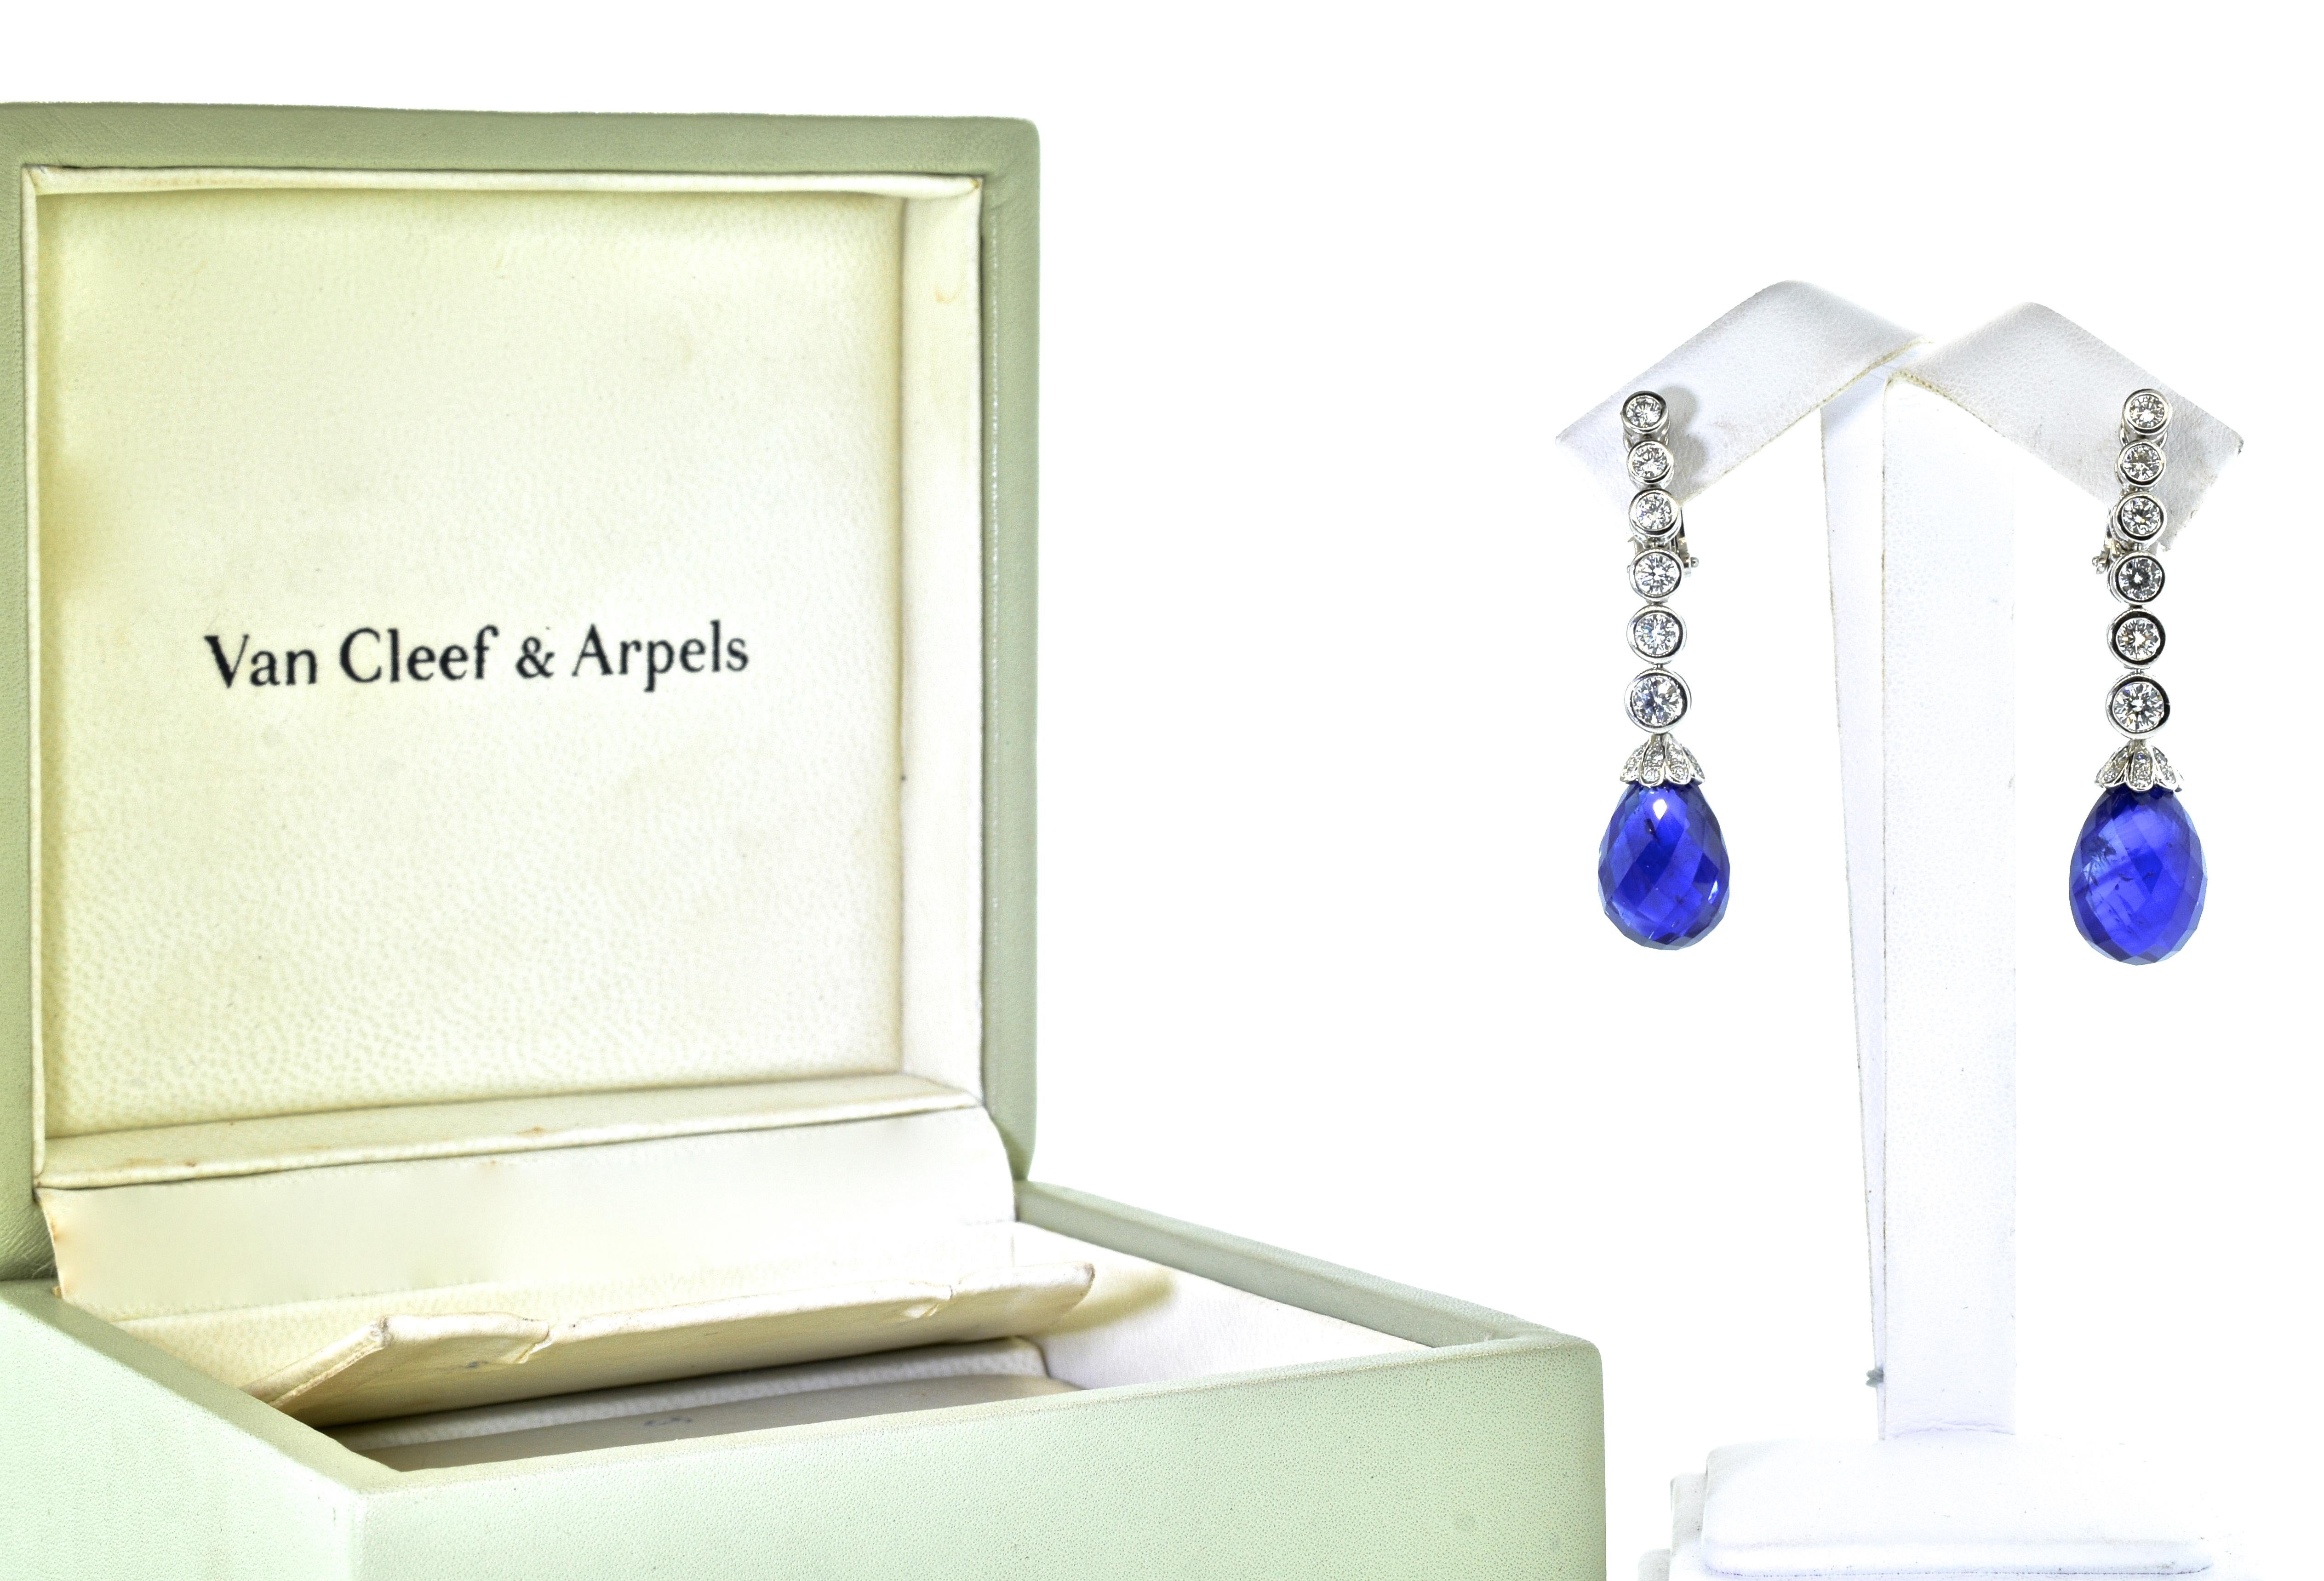 Van Cleef & Arpels earrings possessing two fine faceted briolette natural bright blue sapphires weighing 27.4 cts.  They are well matched and well cut and display a pure bright blue color.  There are approximately 2.5 cts. of fine collection quality